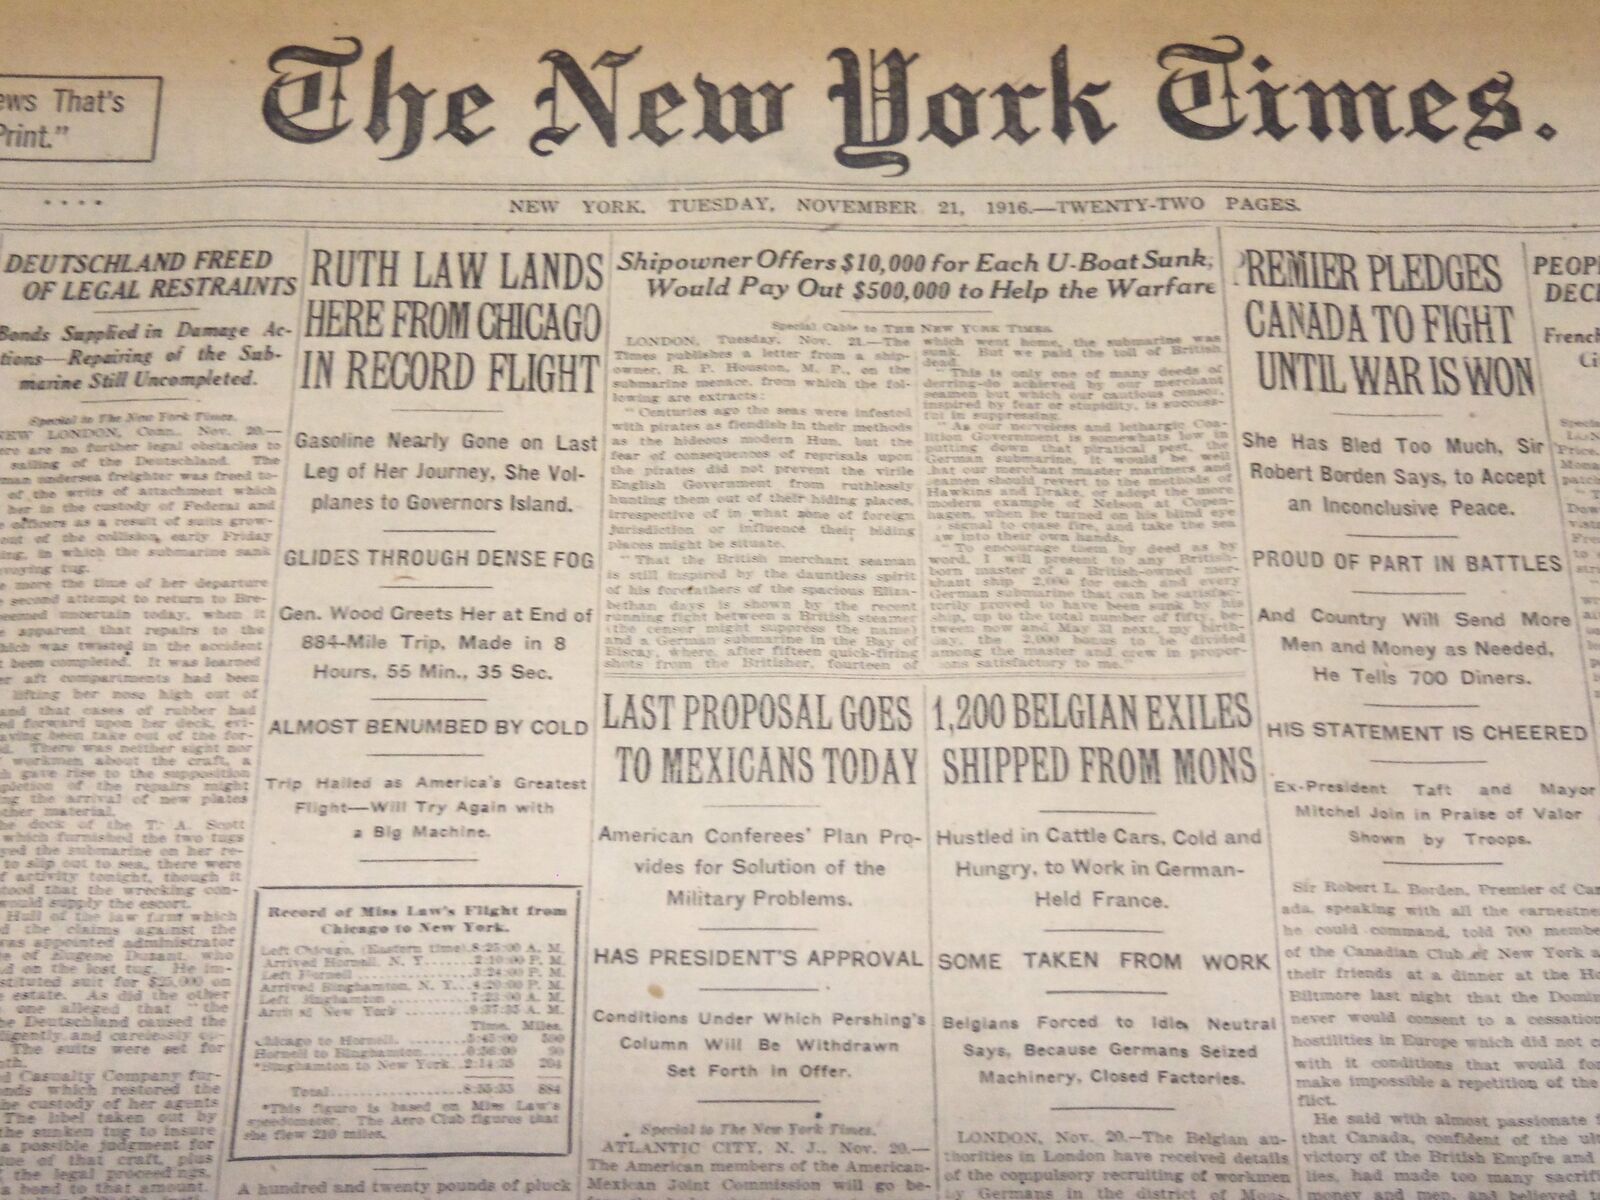 1916 NOV 21 NEW YORK TIMES NEWSPAPER- RUTH LAW LANDS HERE FROM CHICAGO - NT 7724